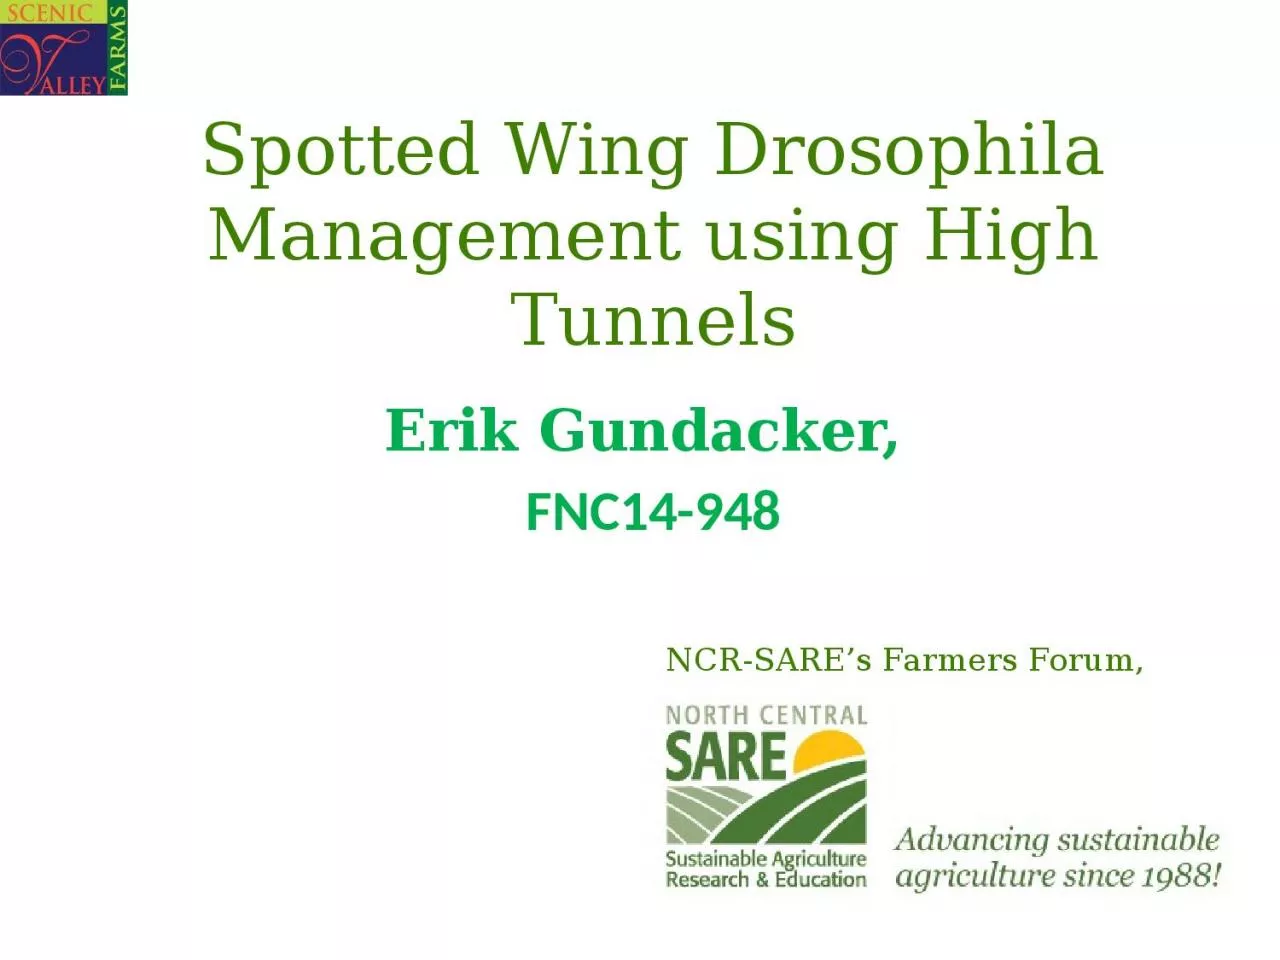 Spotted Wing Drosophila Management using High Tunnels